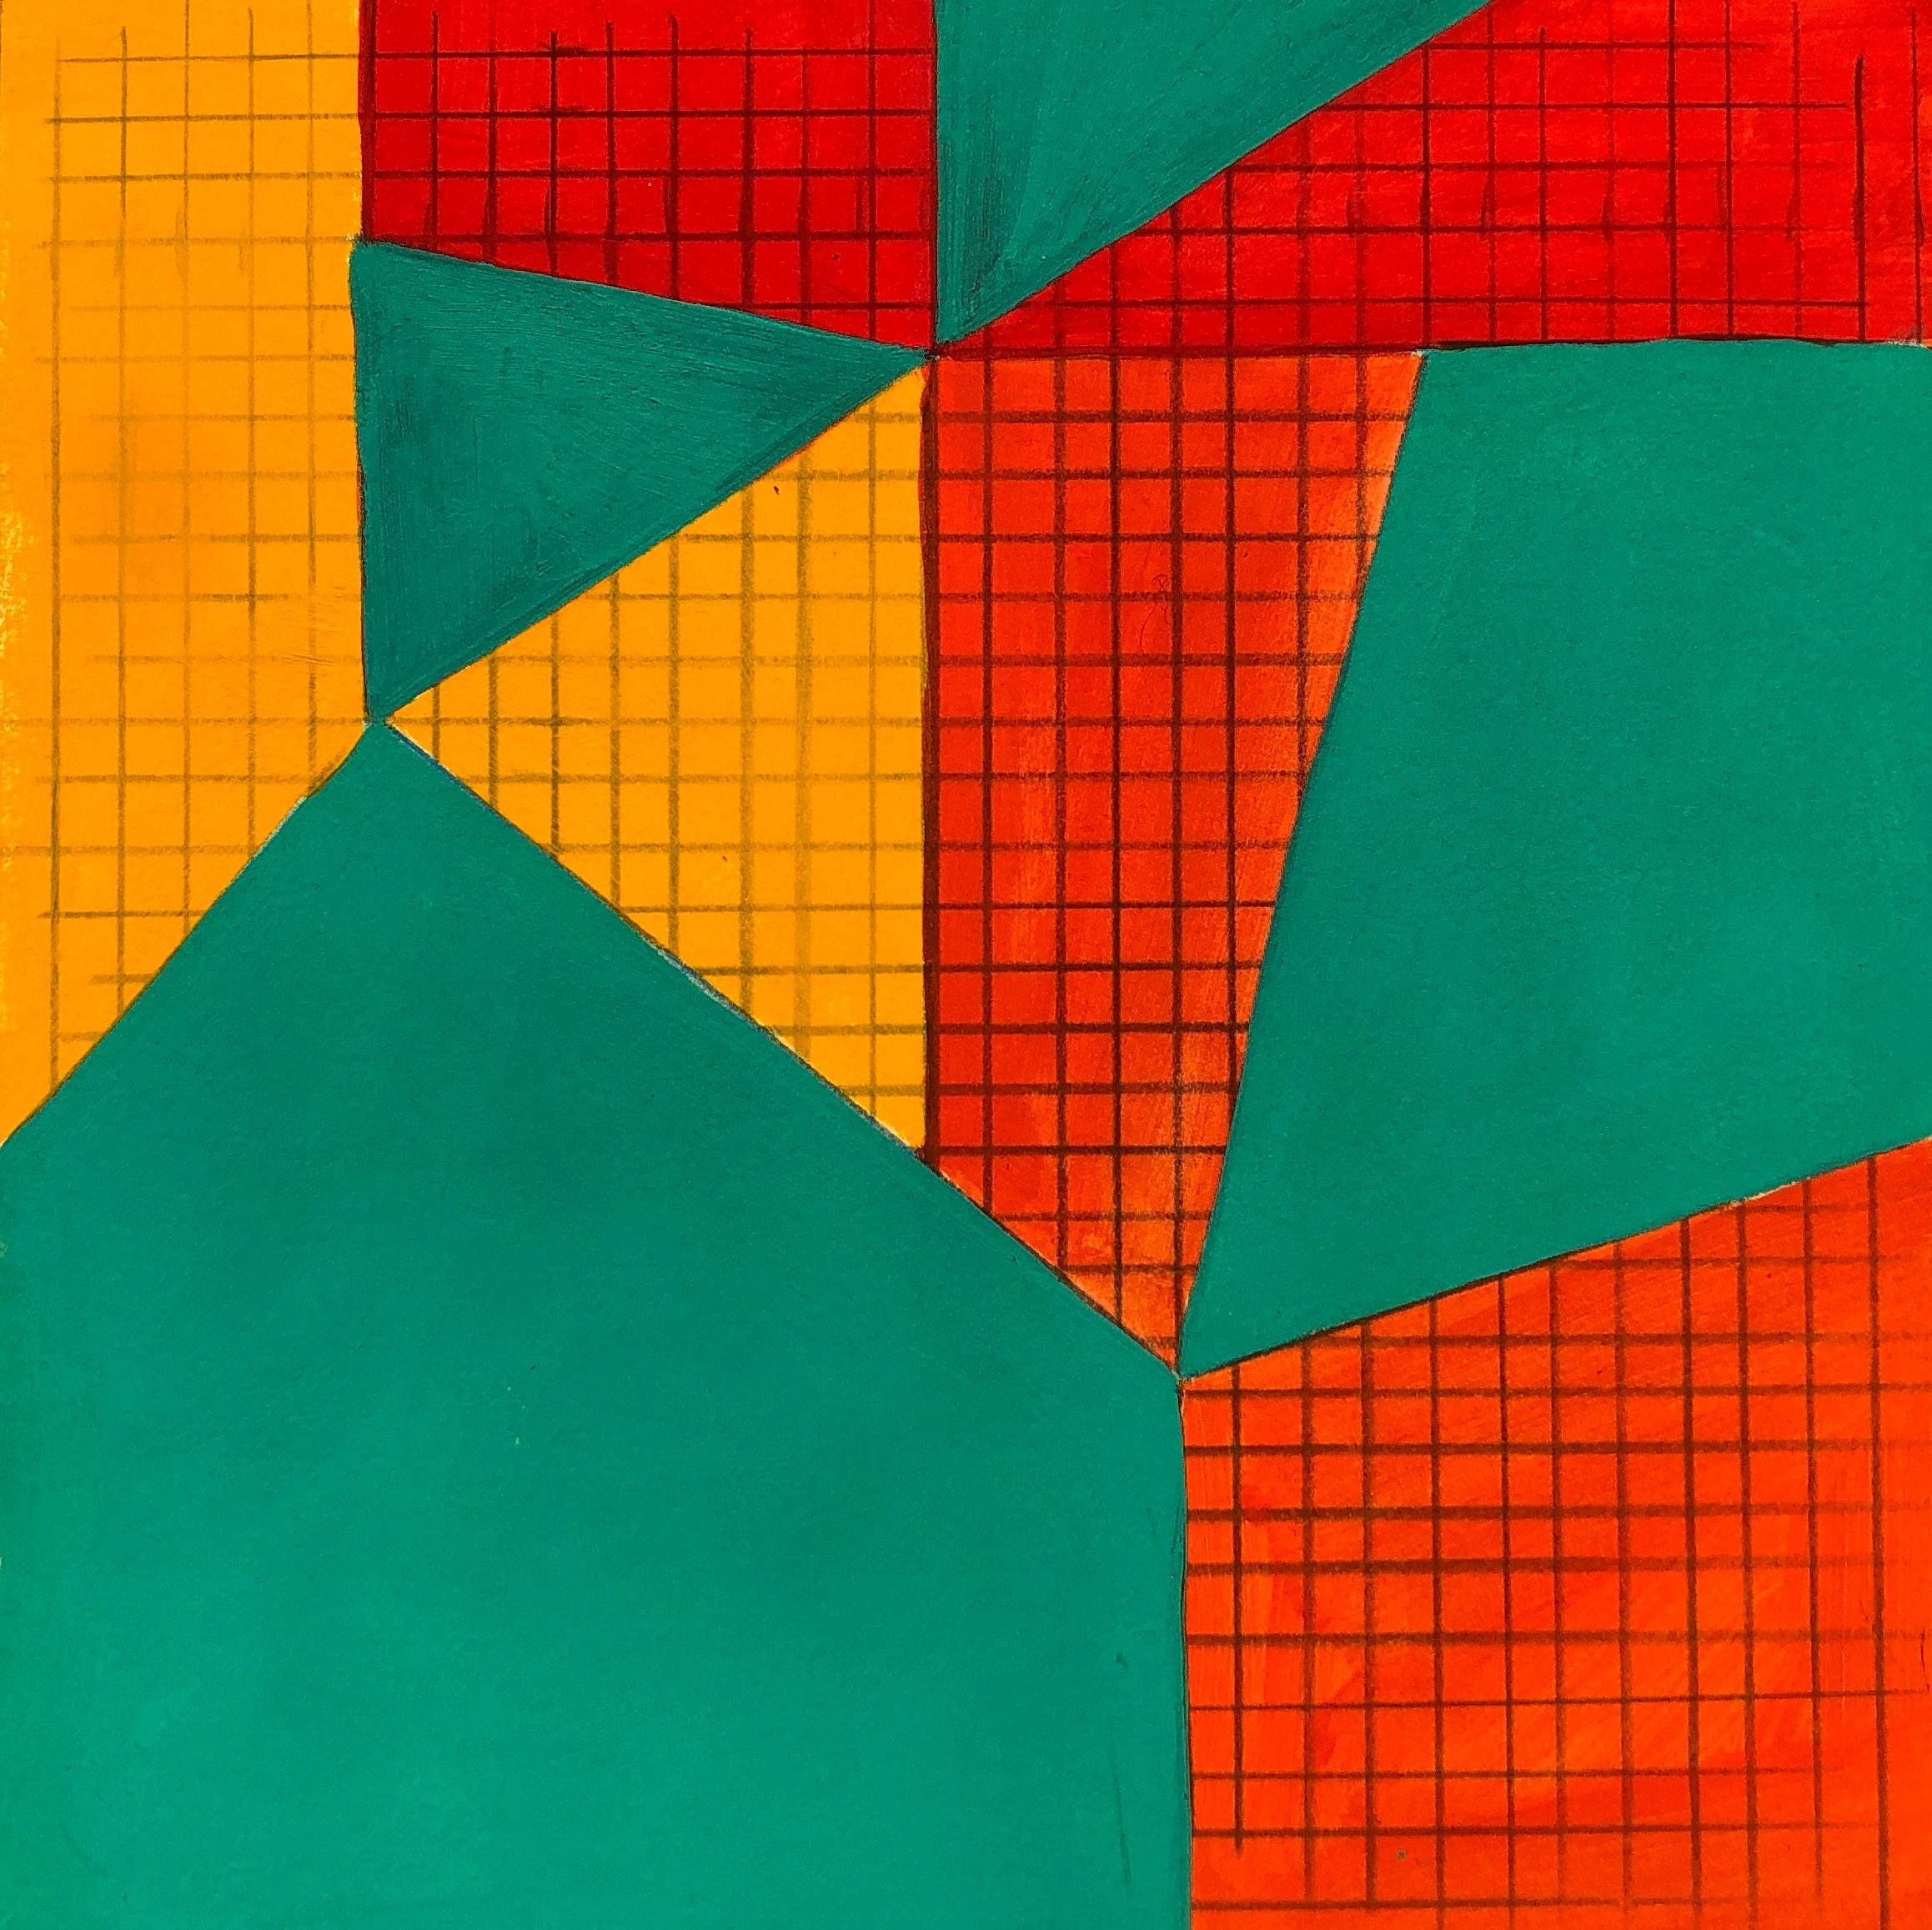 B3, abstract geometric pattern, mixed media on paper, green, yellow and red